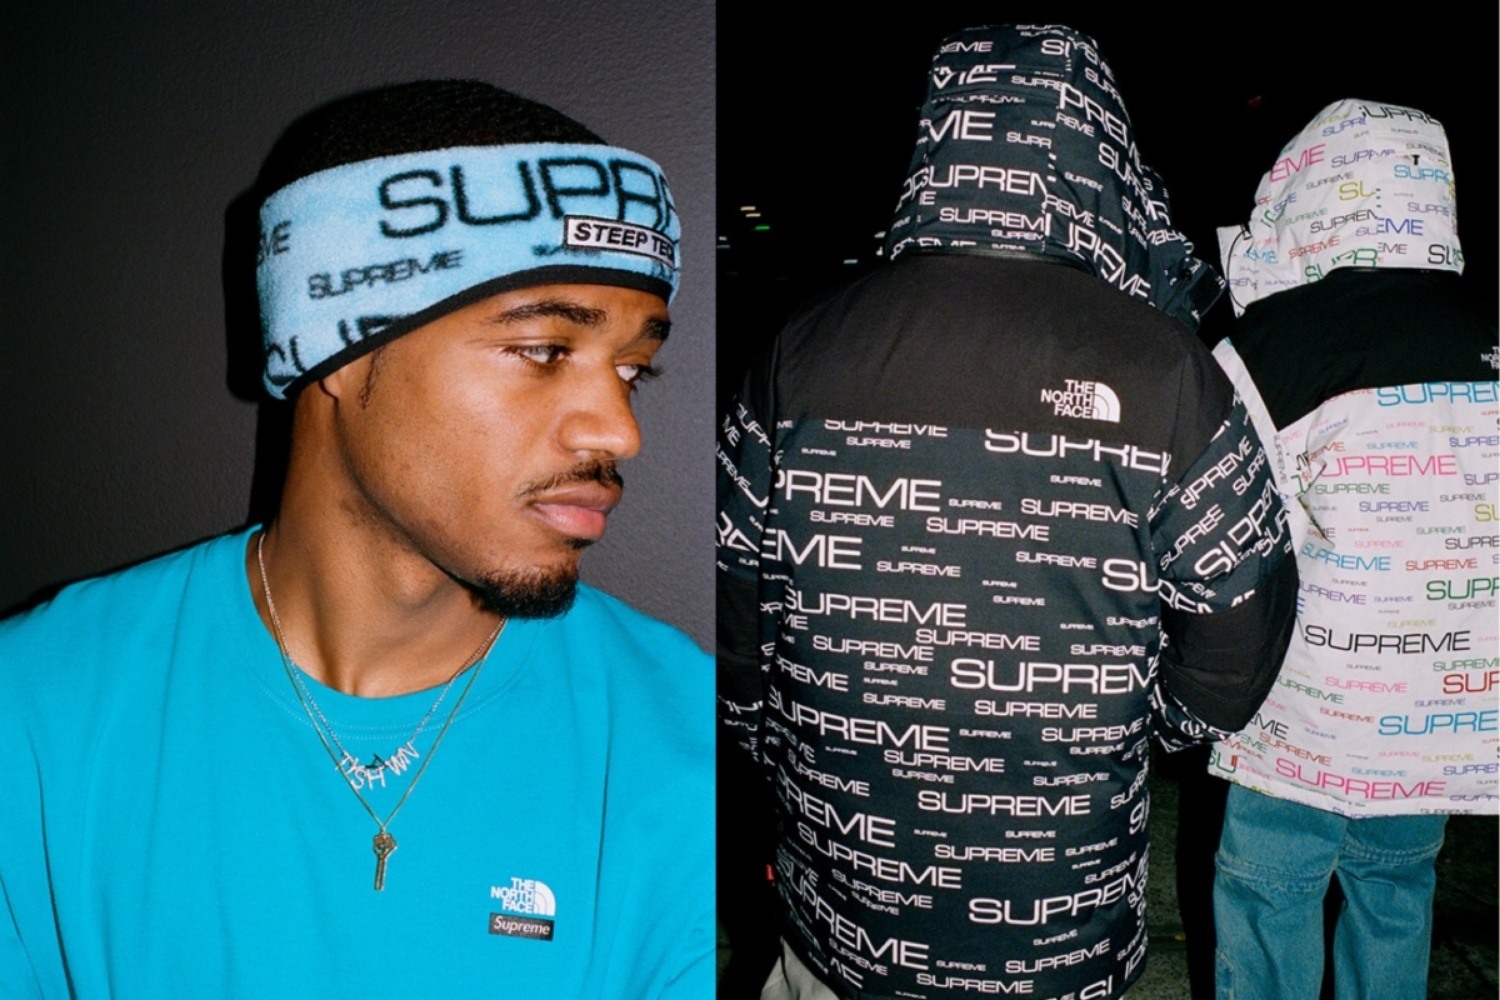 The Supreme x The North Face Fall 2021 Collection